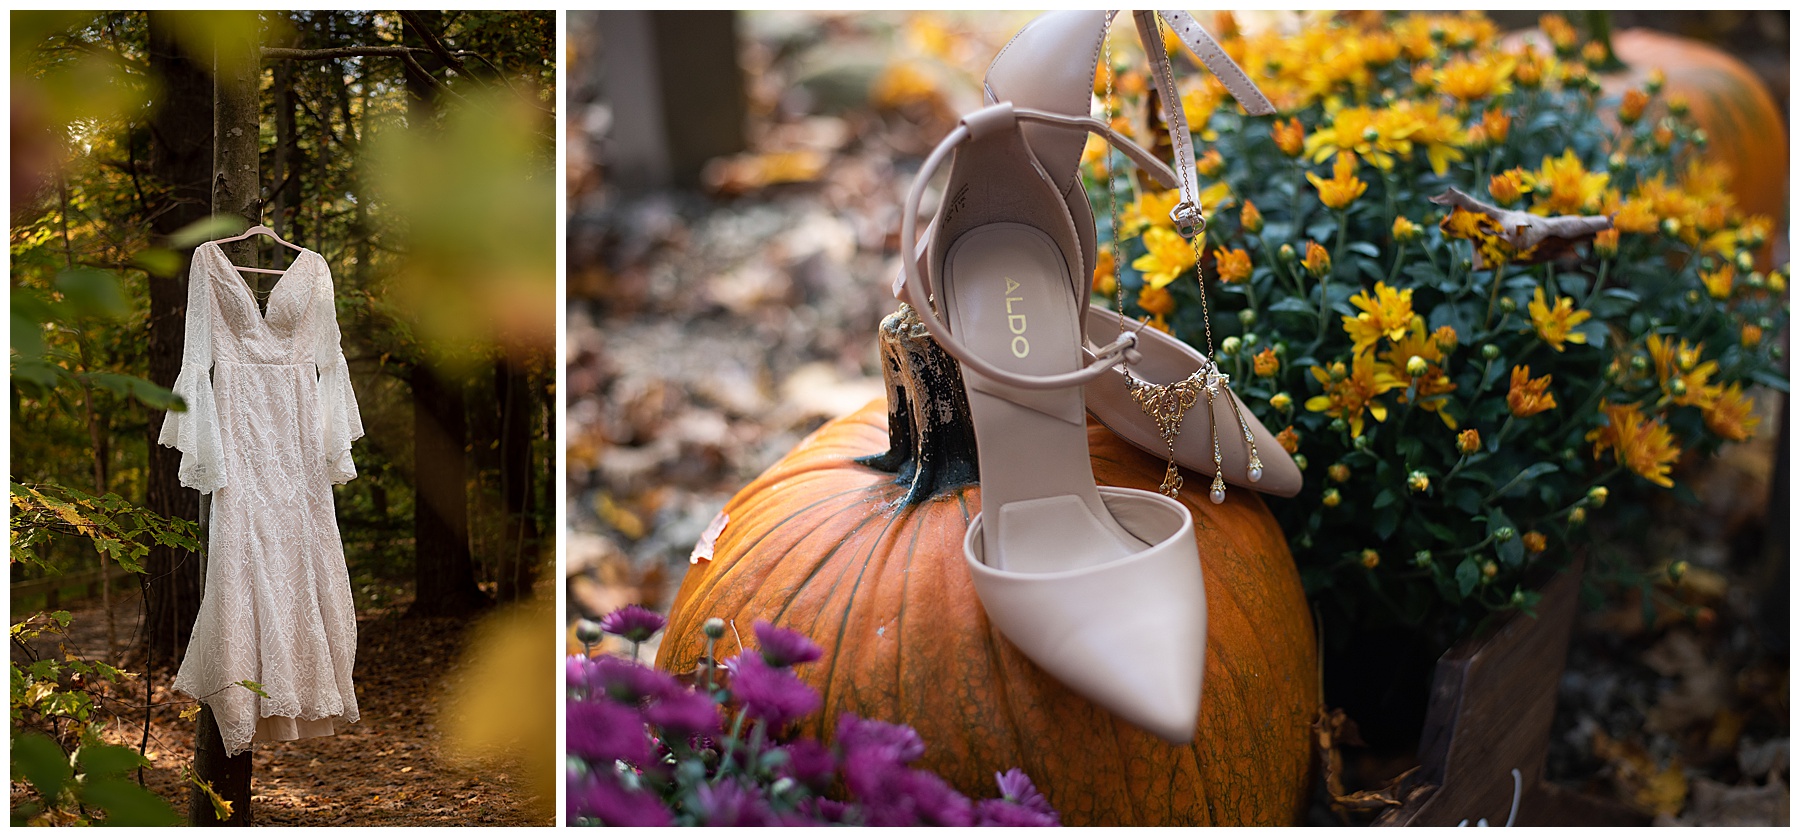 October wedding, small intimate wedding in Geauga County Ohio, Fall wedding, vintage getting ready details, fairy tale, pink suit, hippie dress, elegant dress with flared sleeves and lace, The Lewis & Ruth Affelder House, small wedding, my fair makeup artistry,